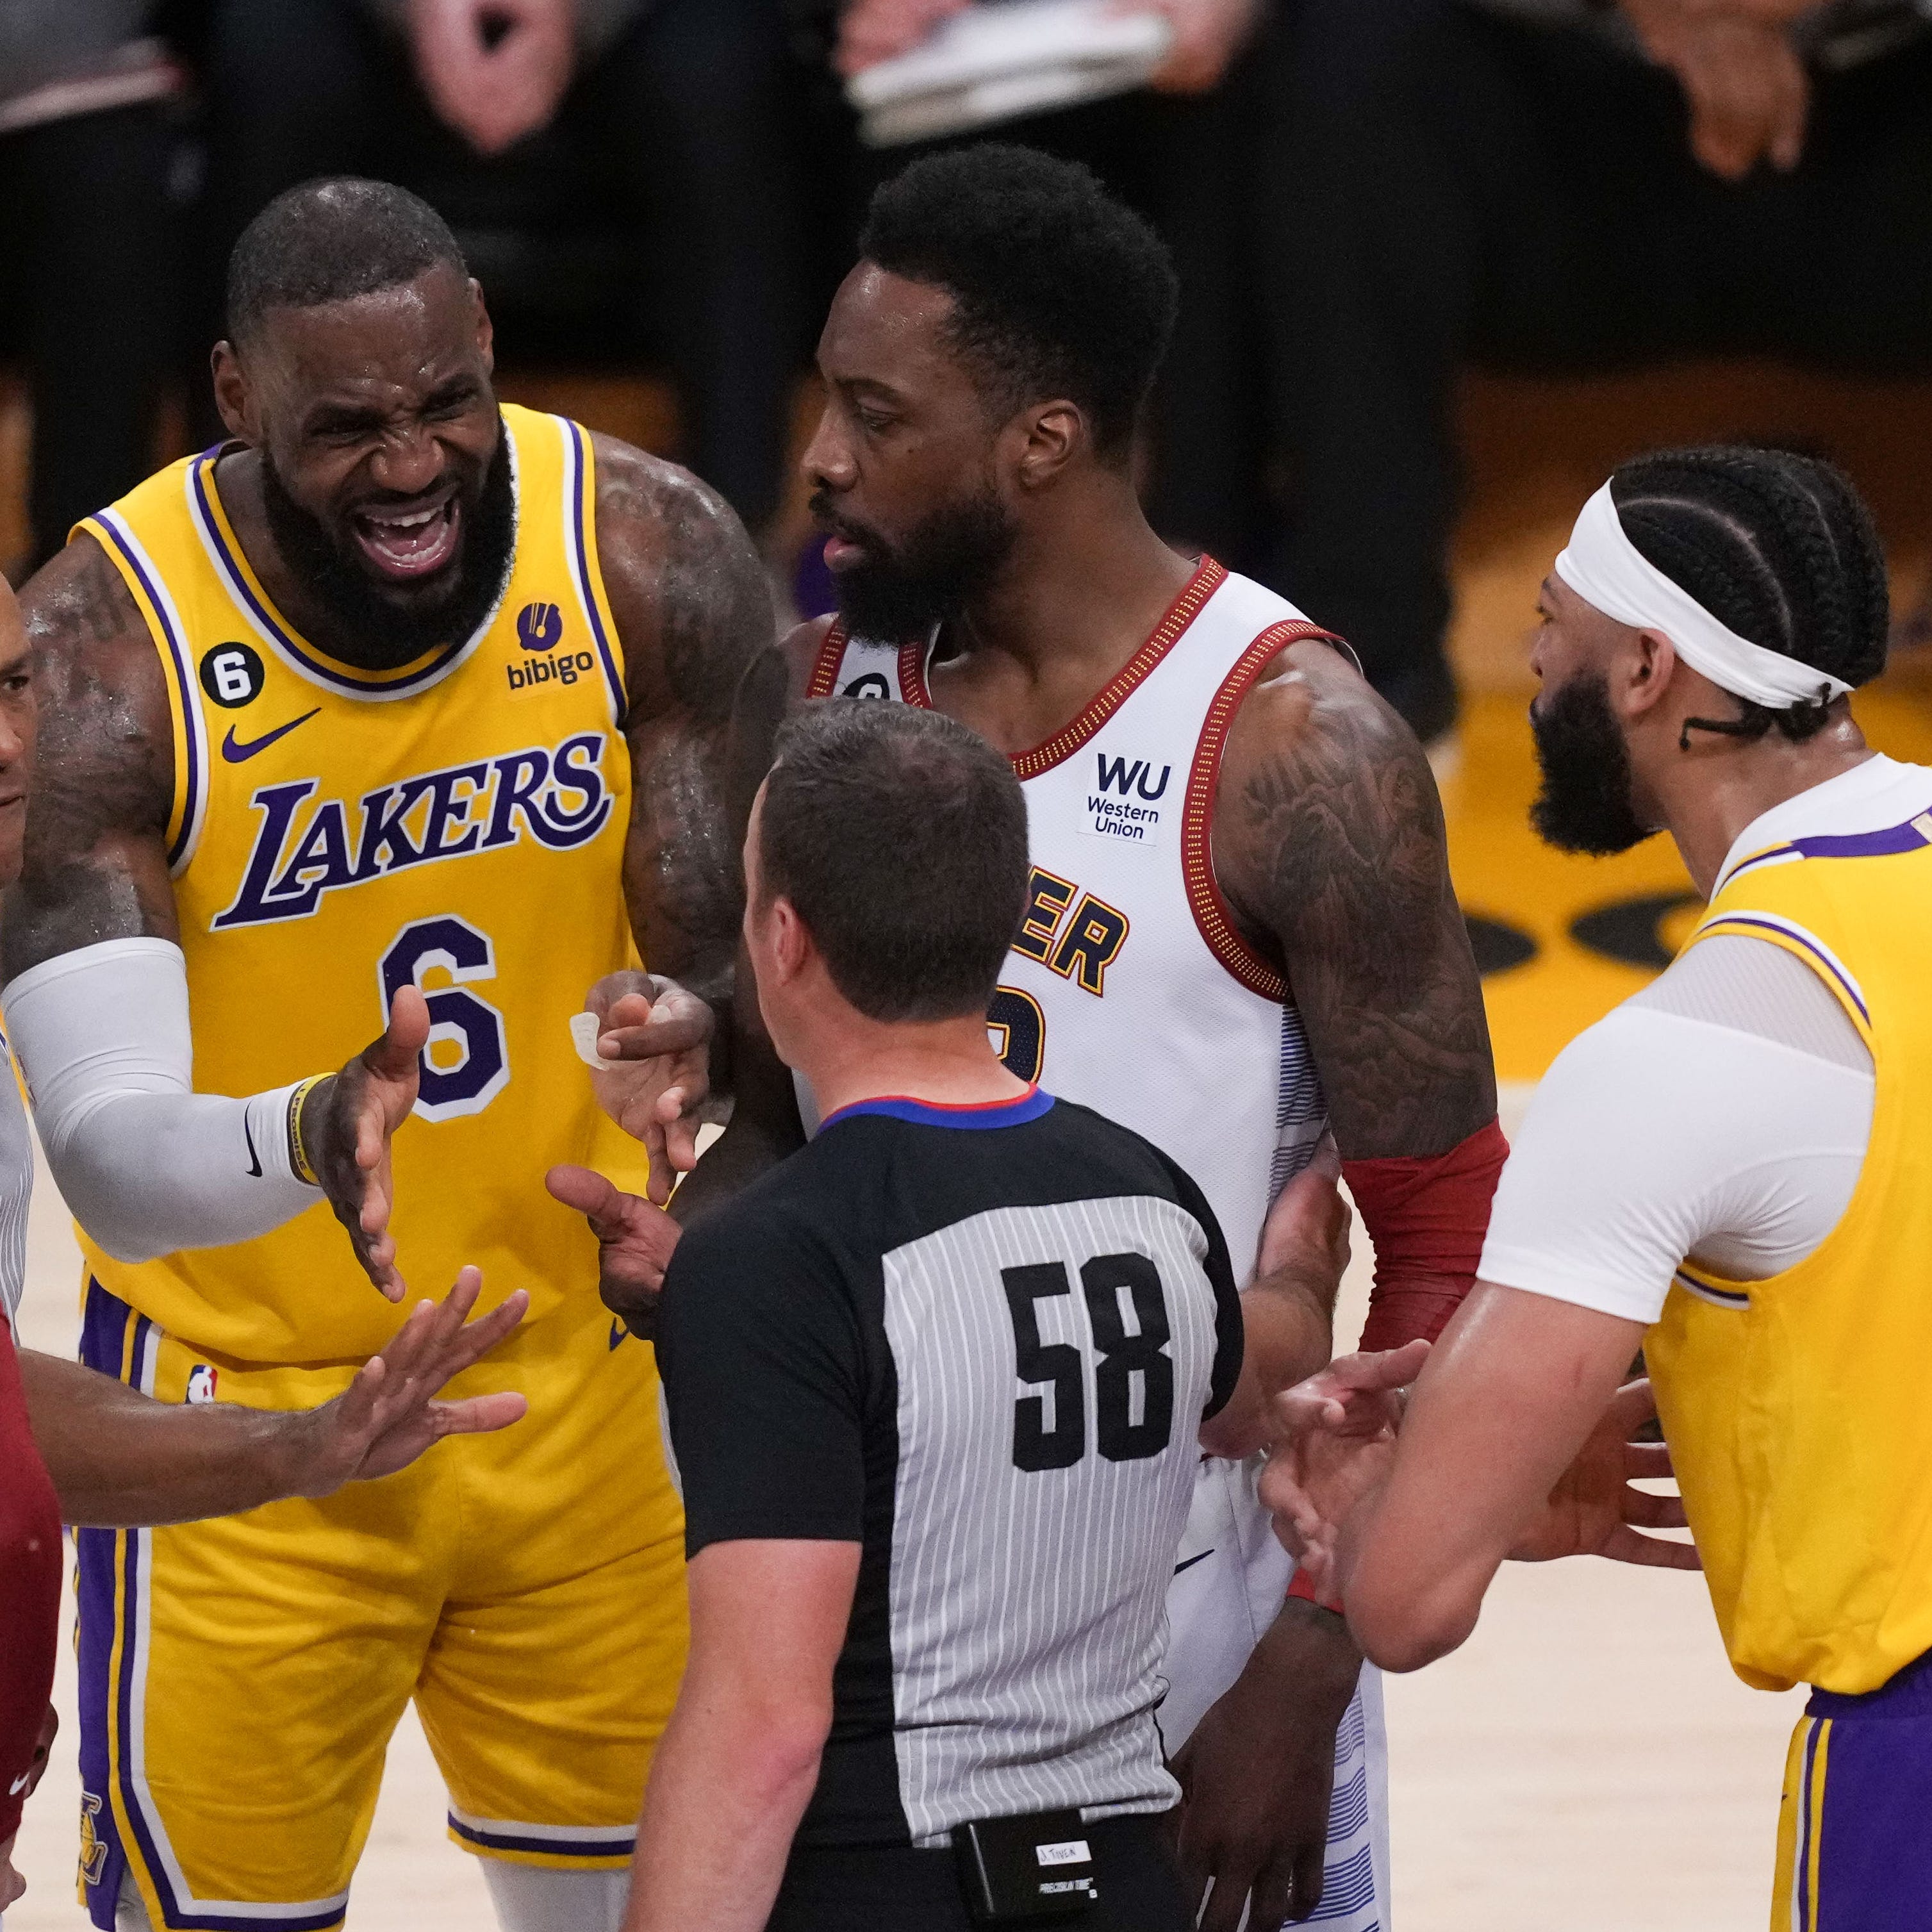 Los Angeles Lakers forward LeBron James (6) reacts to a call against the Denver Nuggets during Game 4 of the Western Conference Finals.